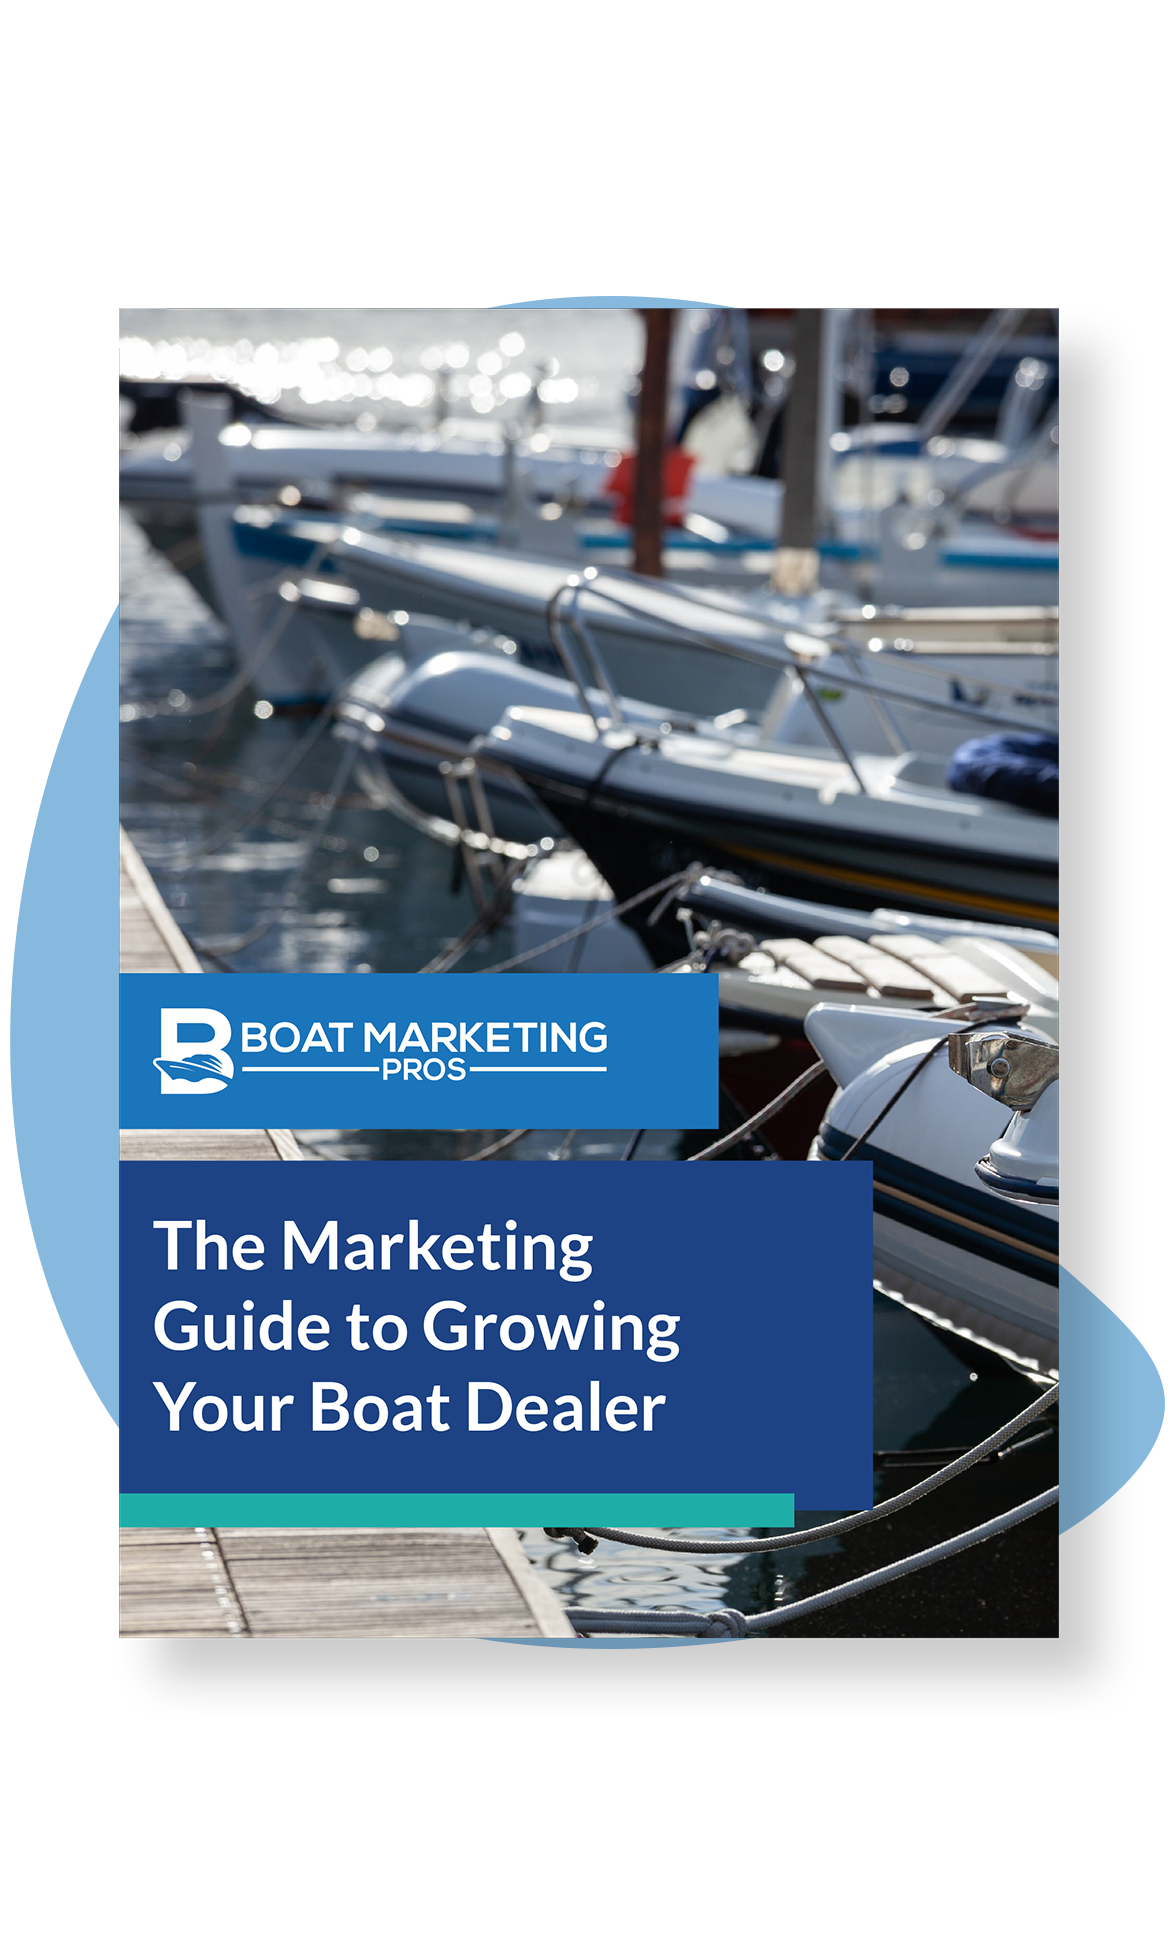 The Marketing Guide to Growing Your Boat Dealer